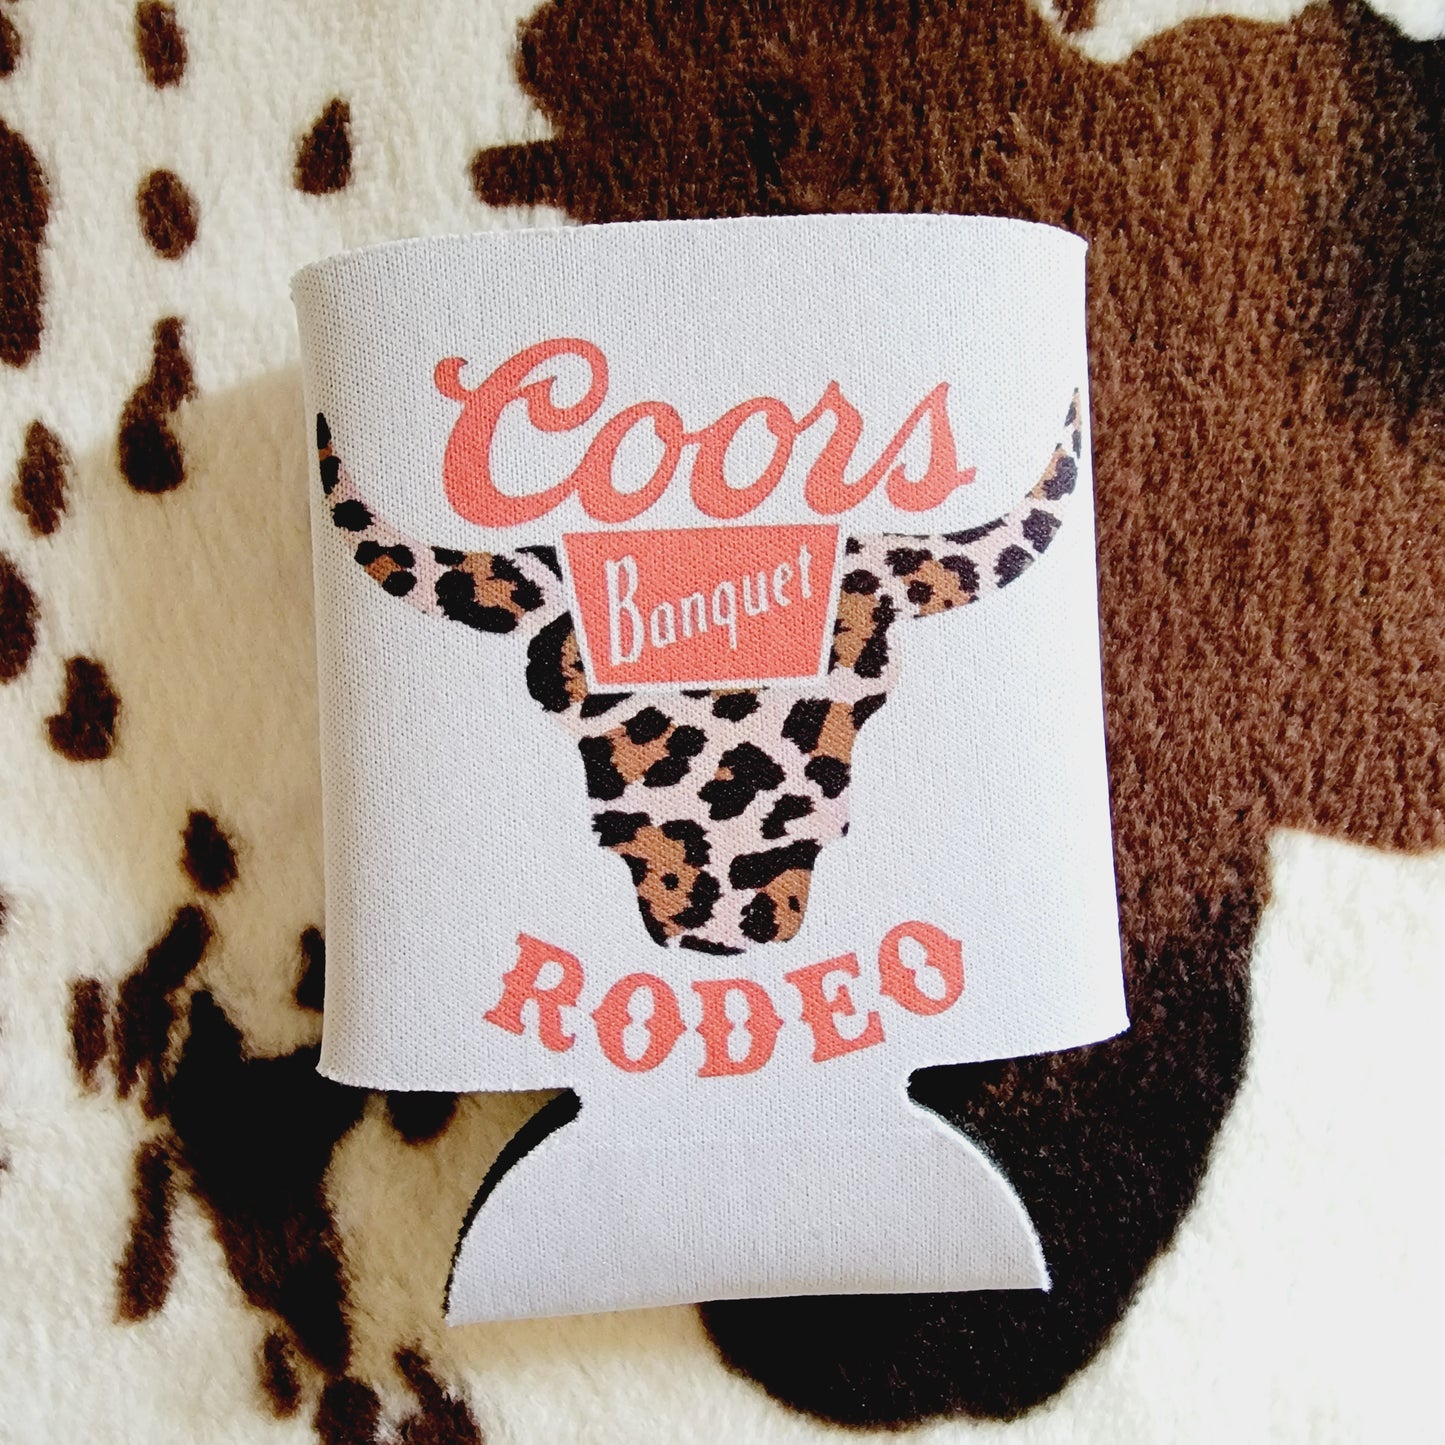 Coors Rodeo Can Cooler Drink Holder Koozie